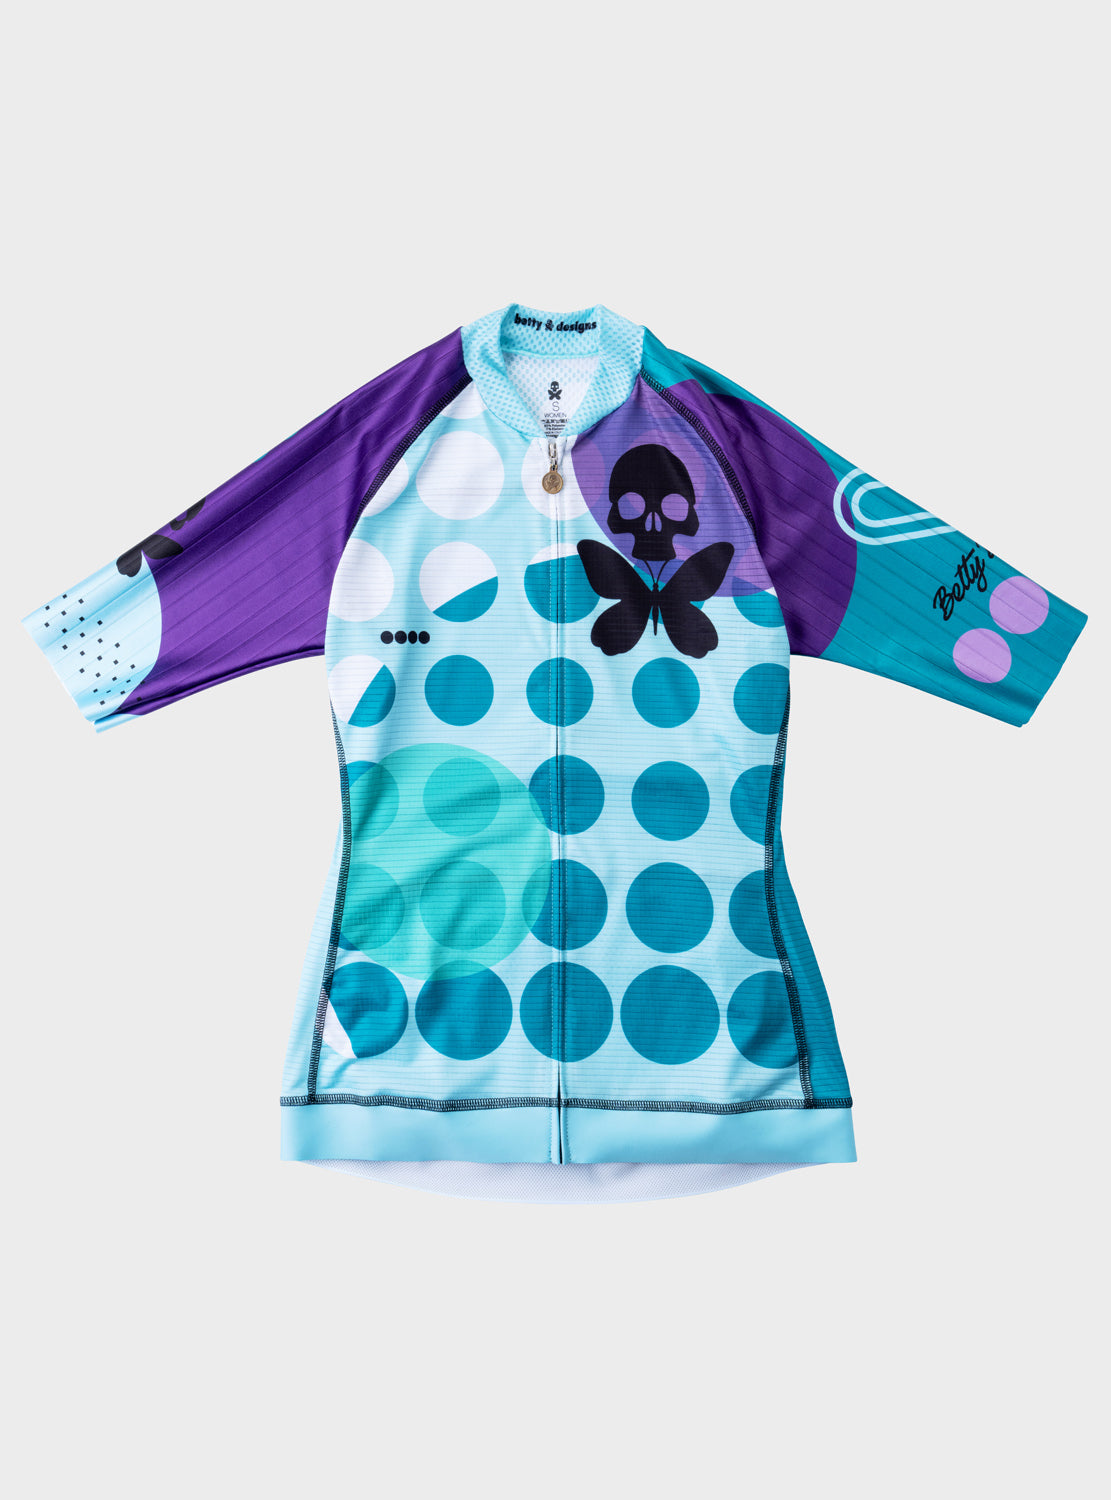 Shift Green Race Fit Cycle Jersey